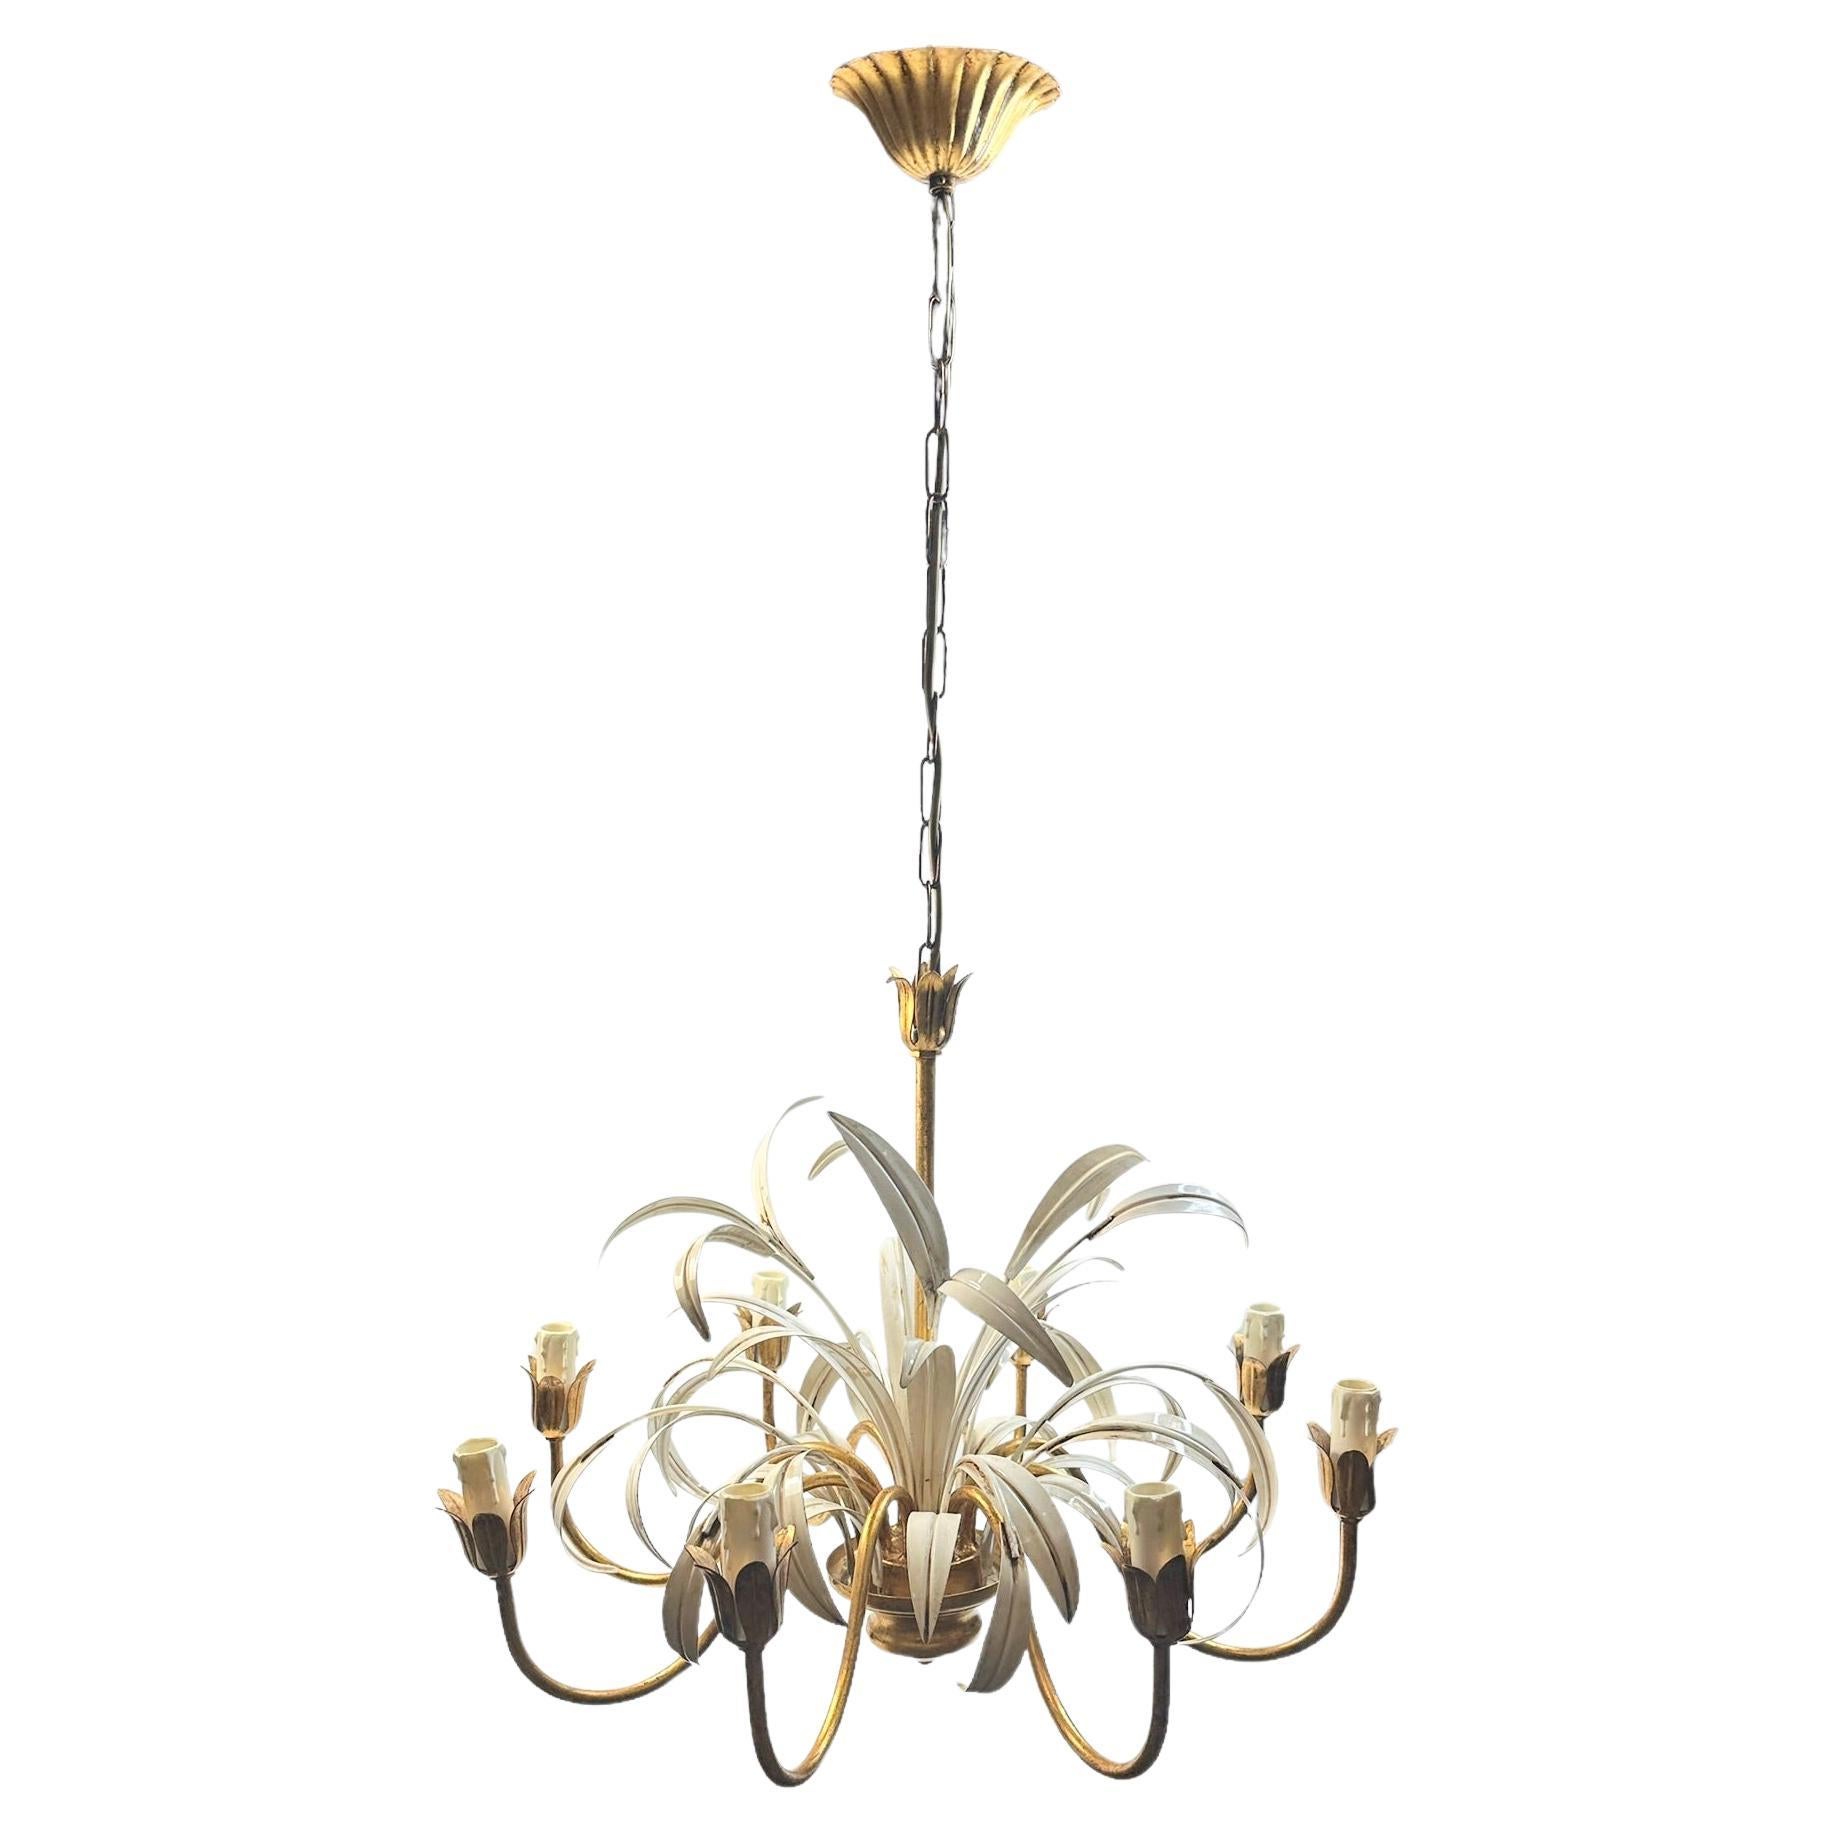 8-Light Gilt Metal Reed Leaf Chandelier Tole Toleware Coco Chanel Style, Italy